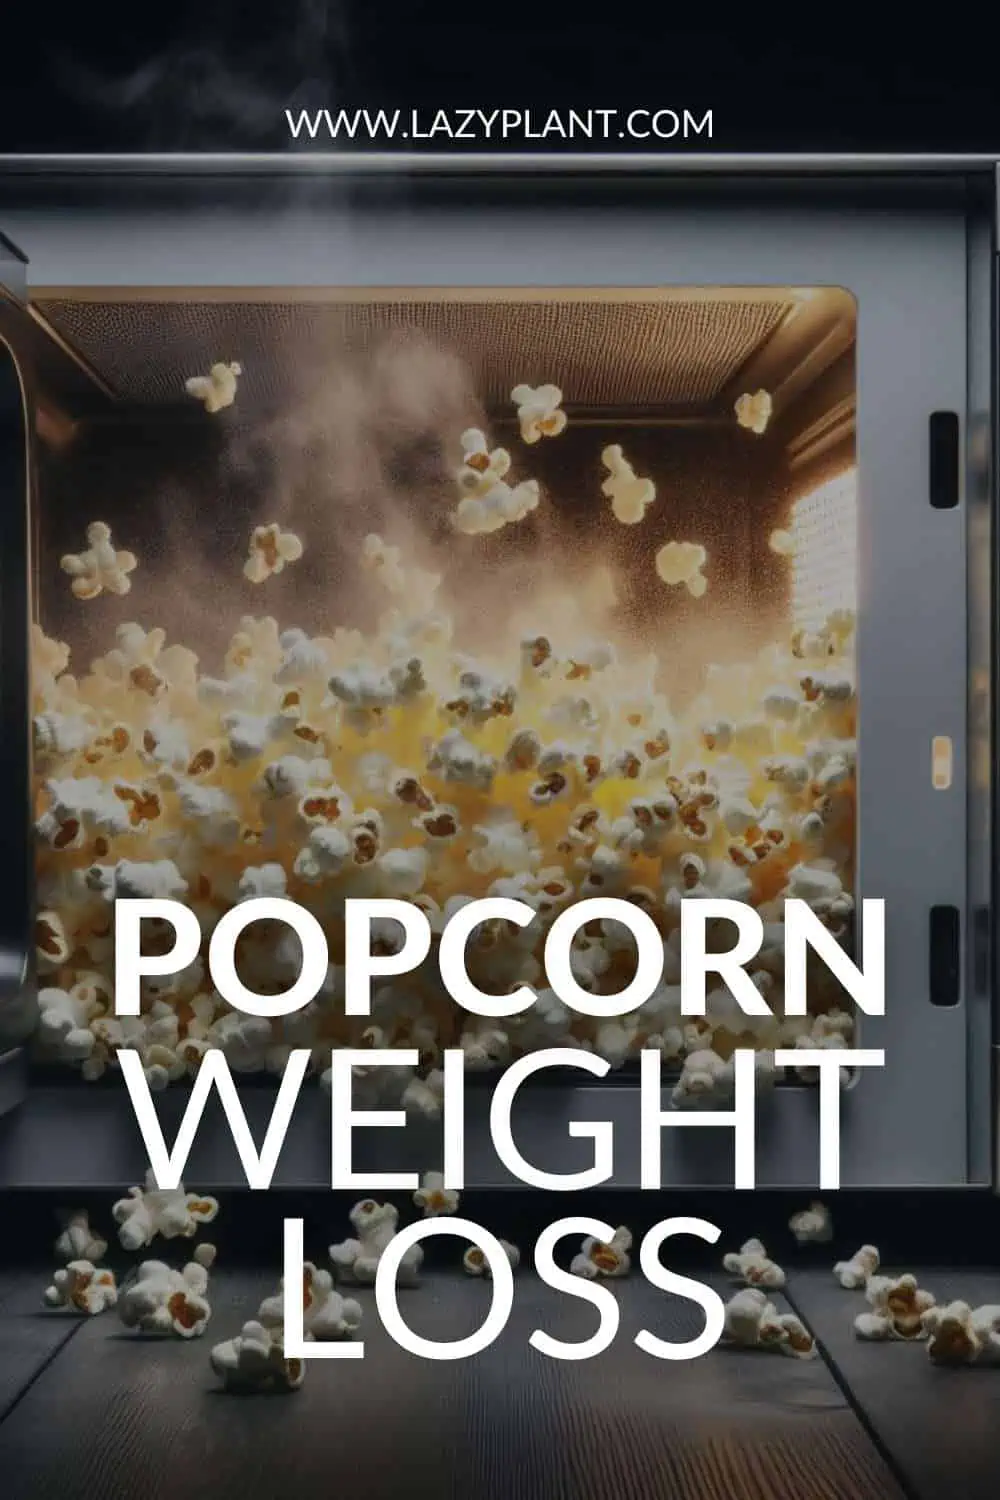 Popcorn supports Weight Loss!